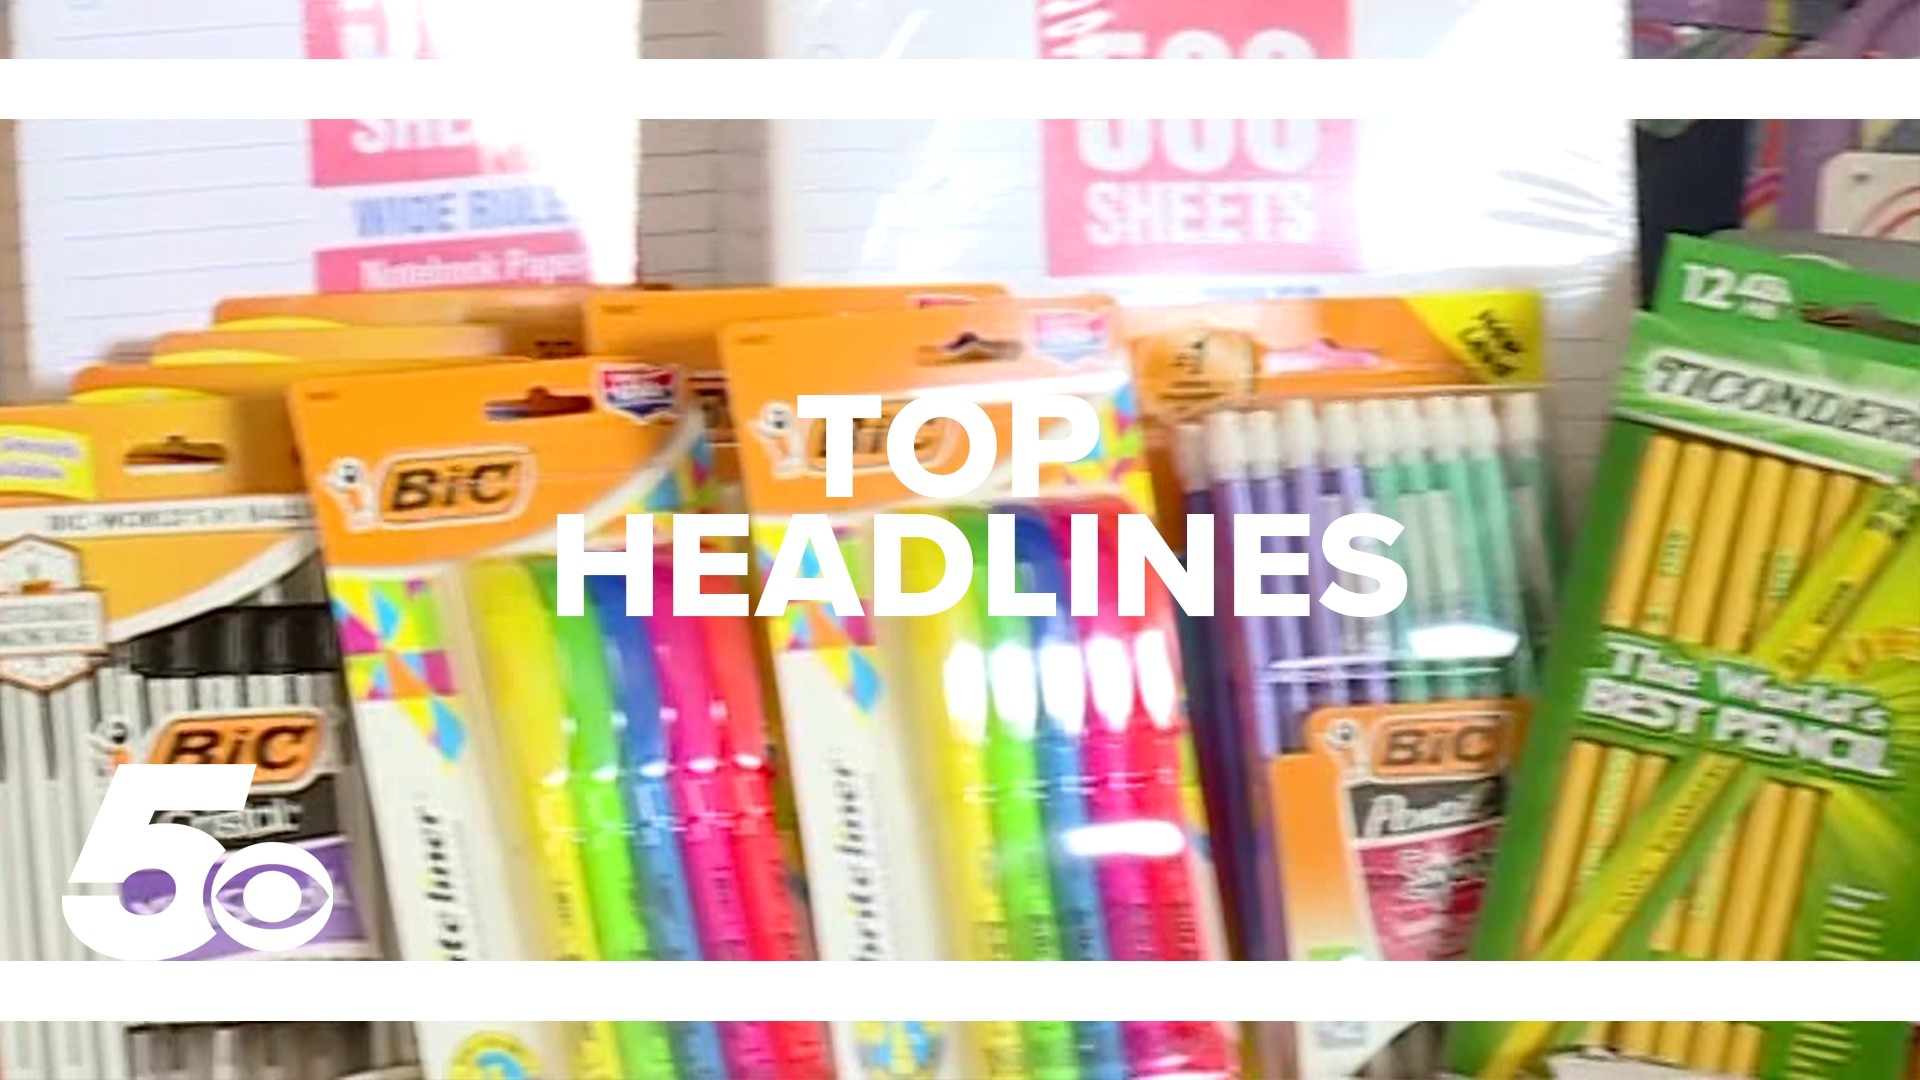 Today's top headlines include funding cuts to a crisis center, back to school supplies drive, weather, and more.